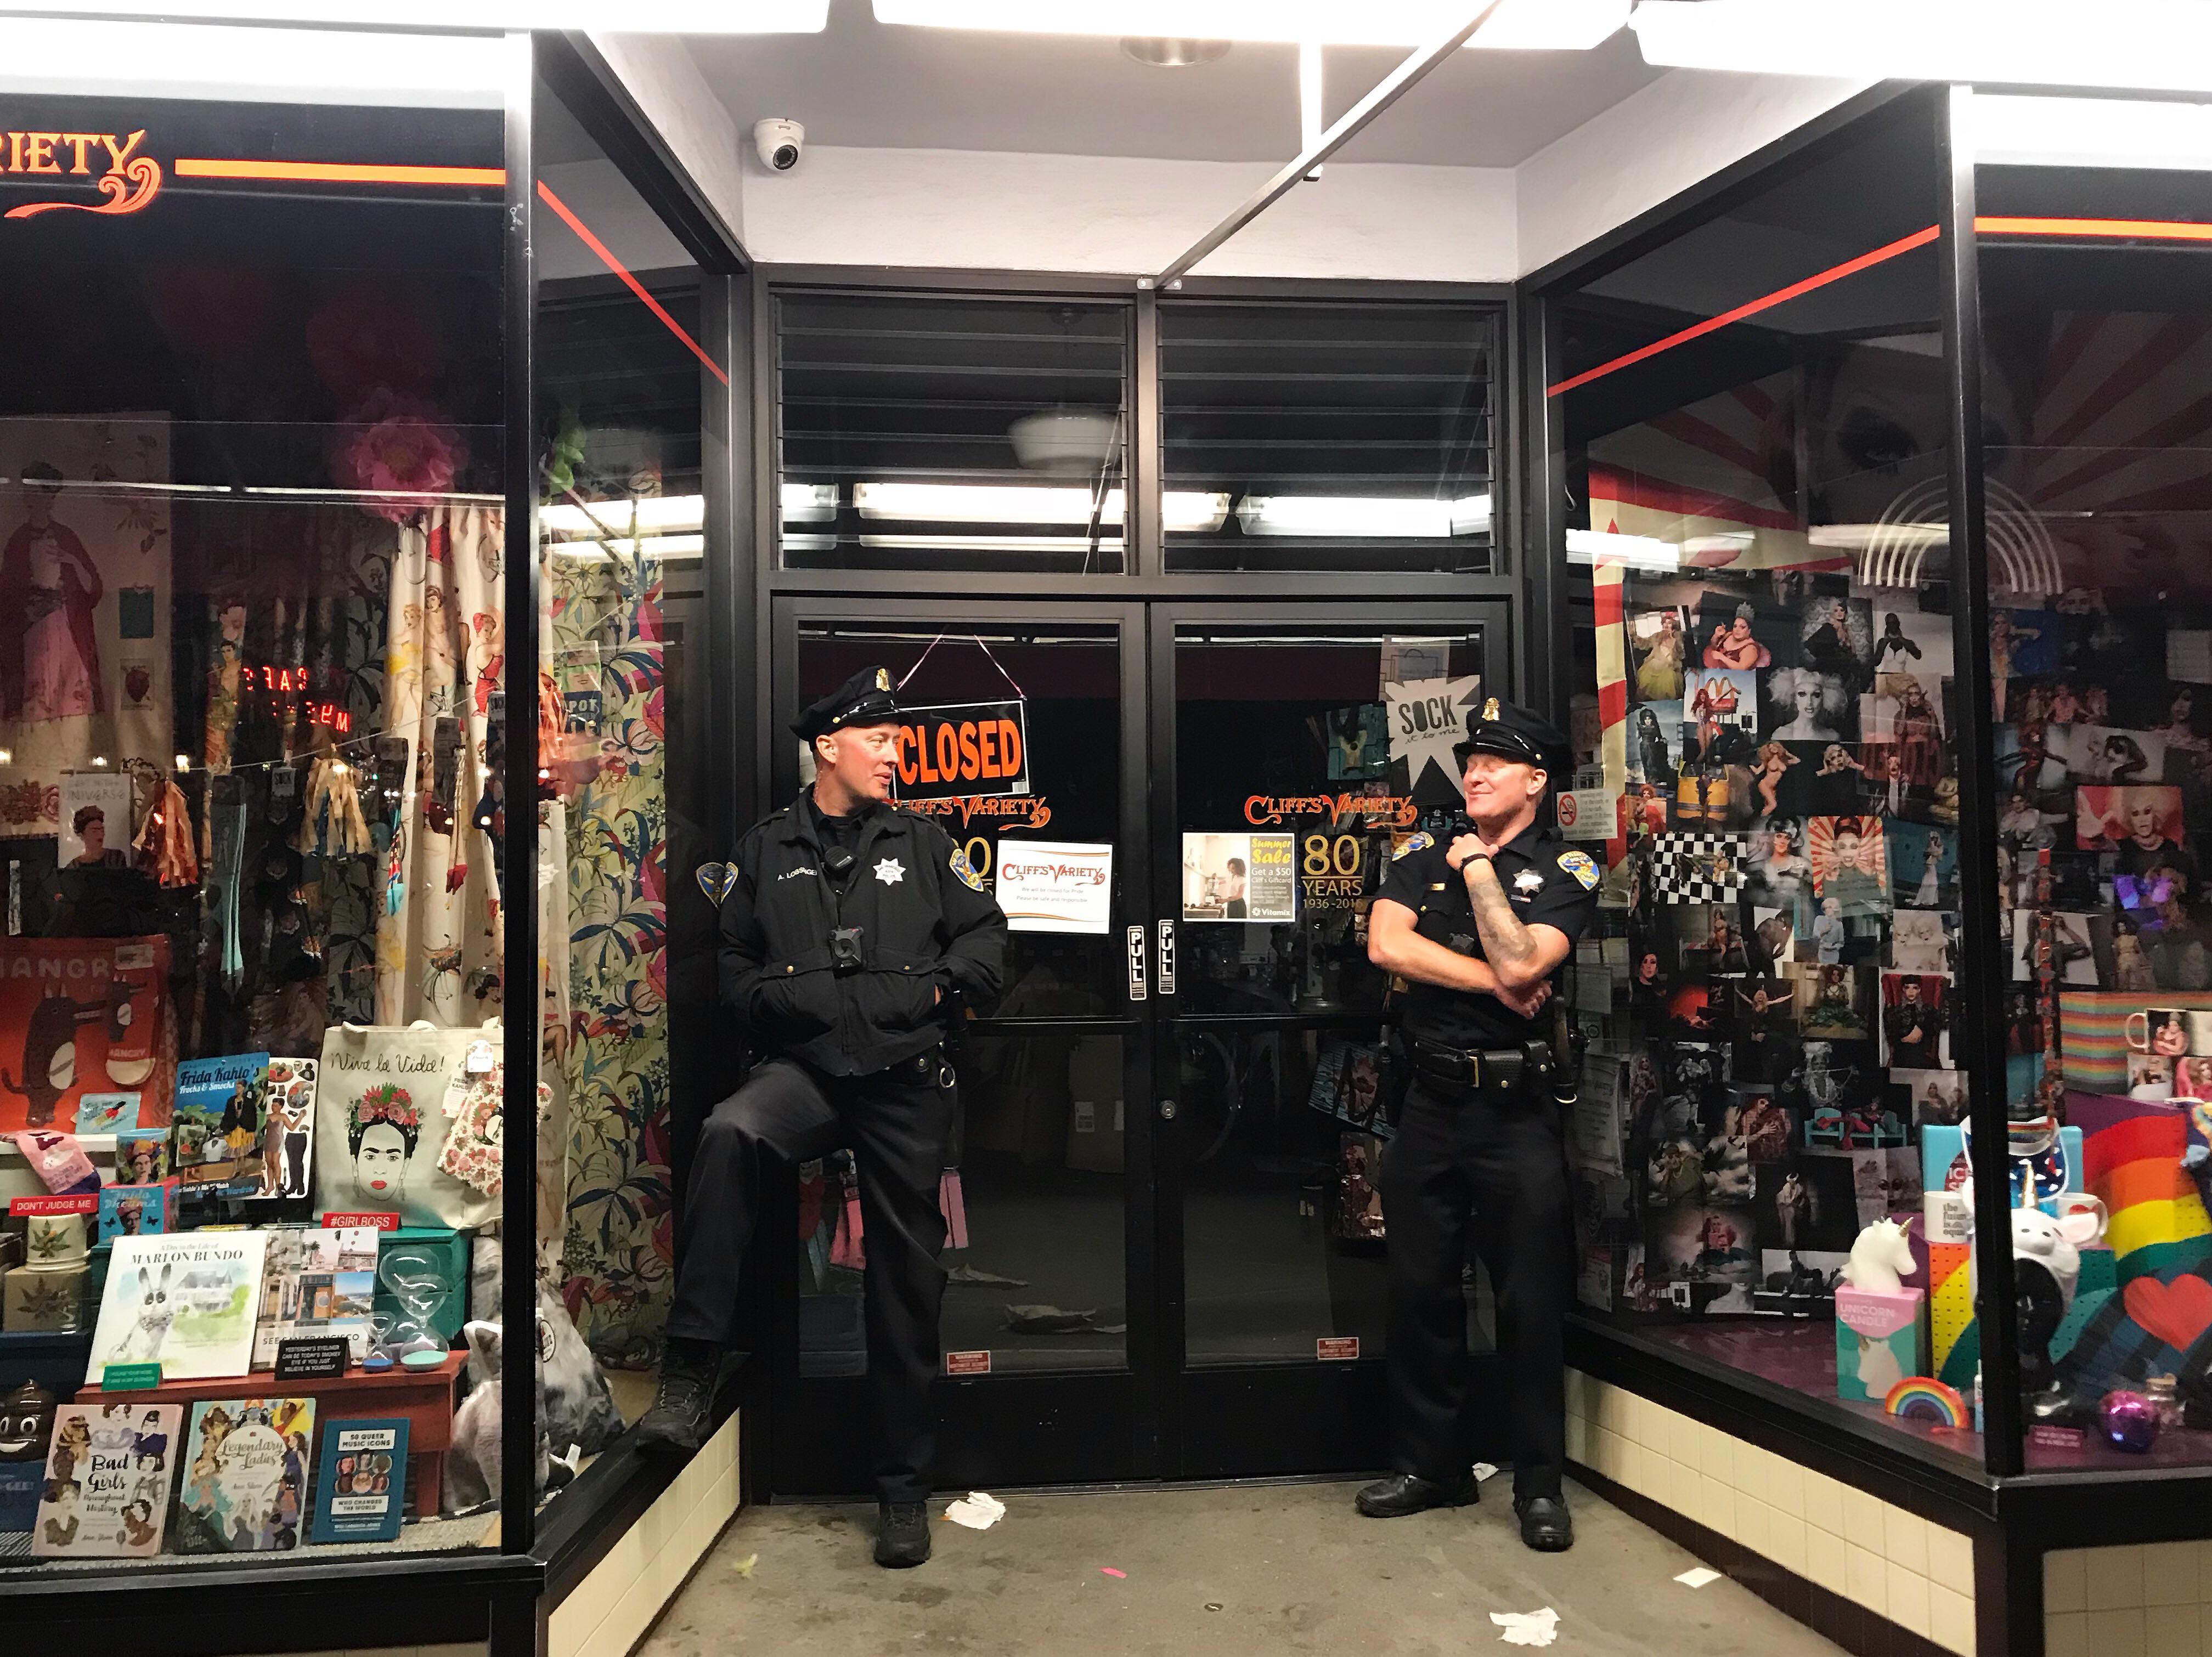 Candid photograph of two police officers standing in front of a shopfront in San Francisco circa 2018.